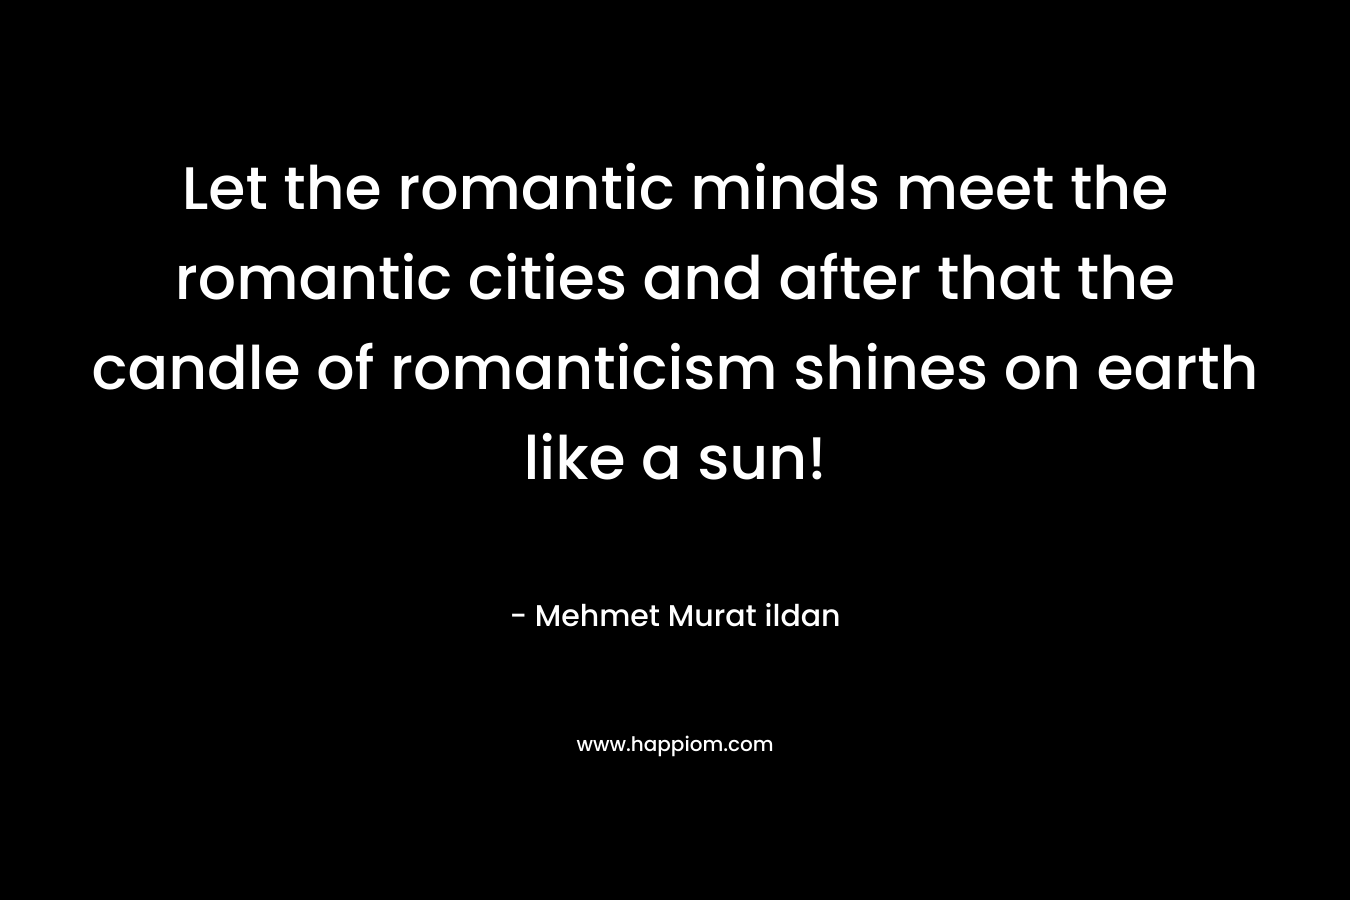 Let the romantic minds meet the romantic cities and after that the candle of romanticism shines on earth like a sun! – Mehmet Murat ildan